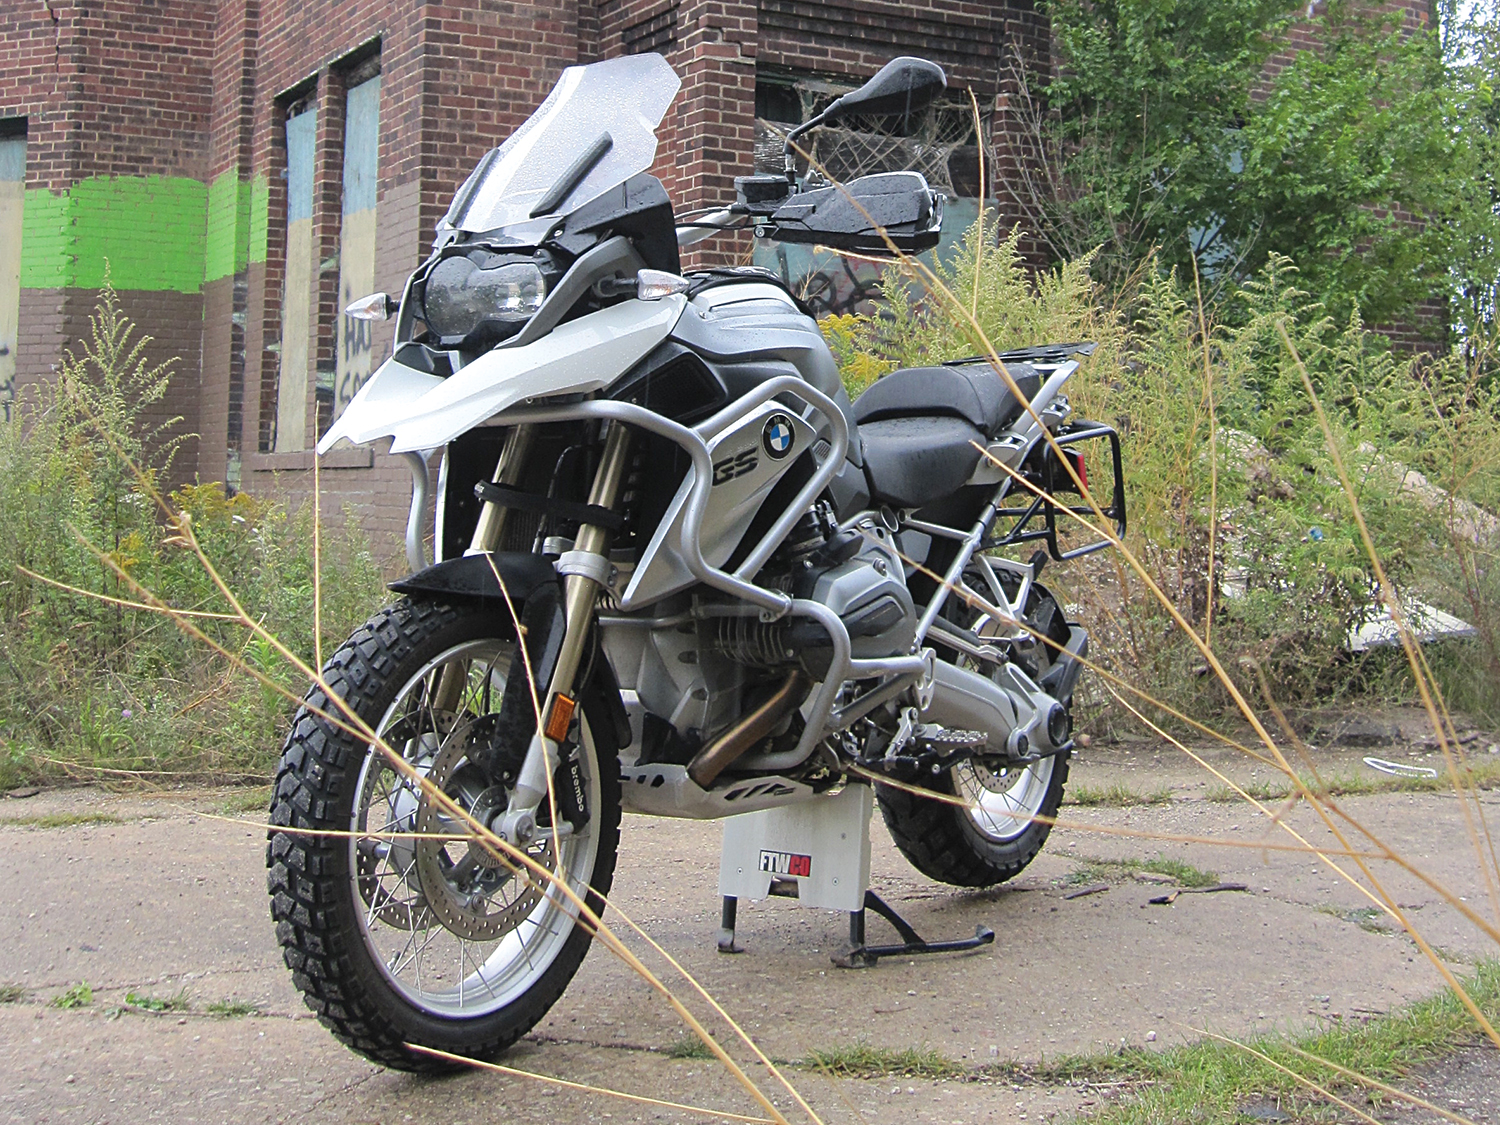 BMW Motorcycles R1200GS | Motorcyclist